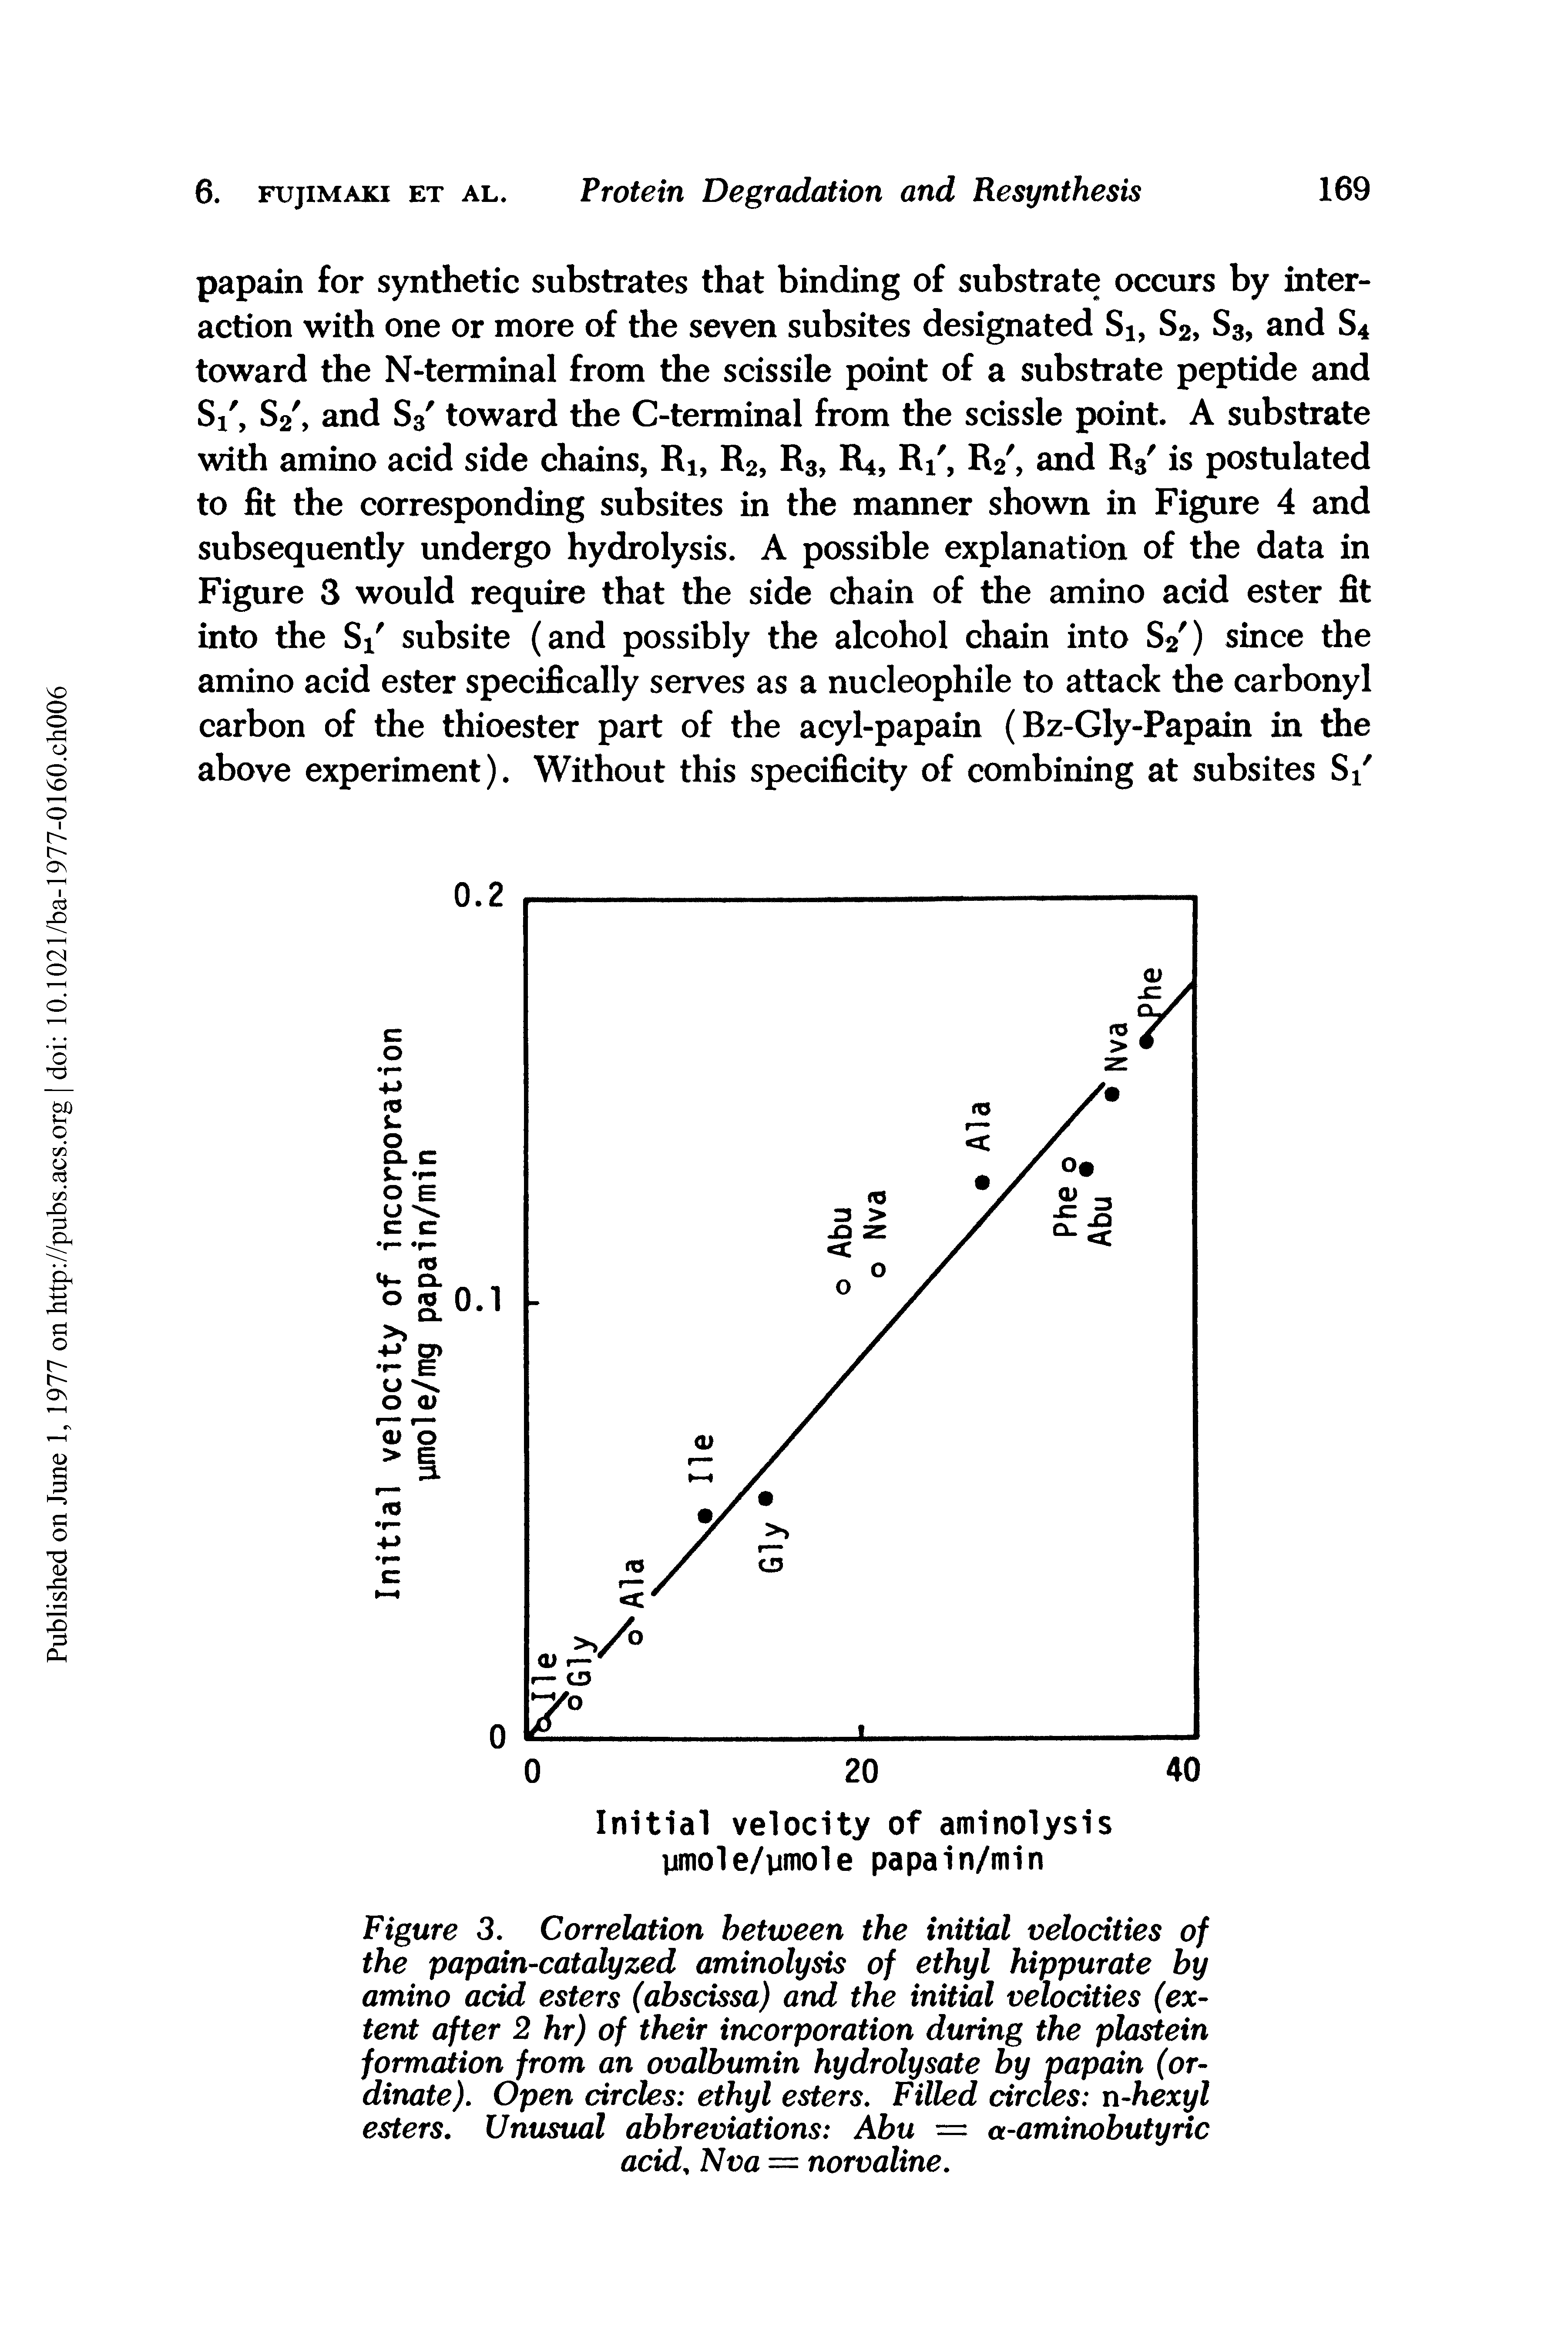 Figure 3. Correlation between the initial velocities of the papain-catalyzed aminolysis of ethyl hippurate by amino add esters (abscissa) and the initial velocities (extent after 2 hr) of their incorporation during the plastein formation from an ovalbumin hydrolysate by papain (ordinate). Open circles ethyl esters. Filled drcles n-hexyl esters. Unusual abbreviations Abu = a-aminobutyric acid, Nva = norvaline.